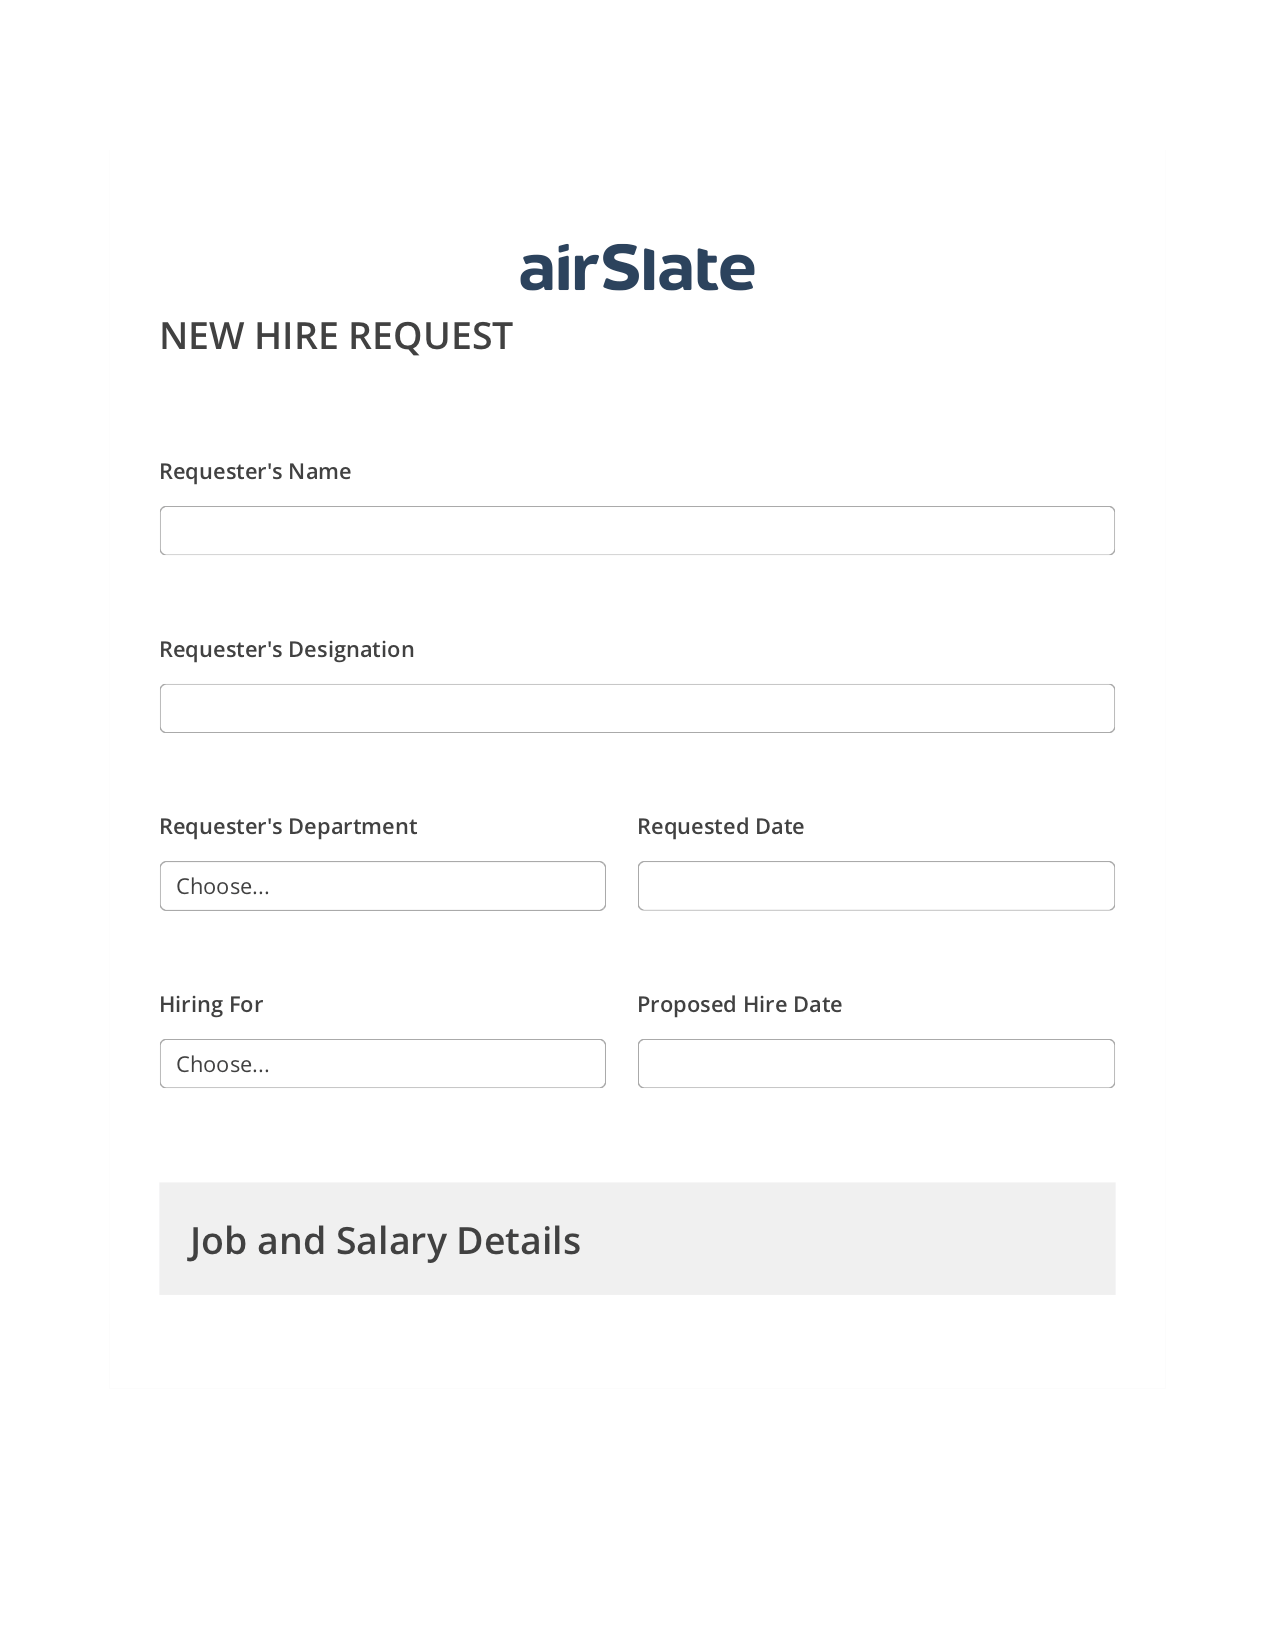 Multirole Hiring Request Workflow Pre-fill from MySQL Bot, Send a Slate with Roles Bot, Archive to OneDrive Bot